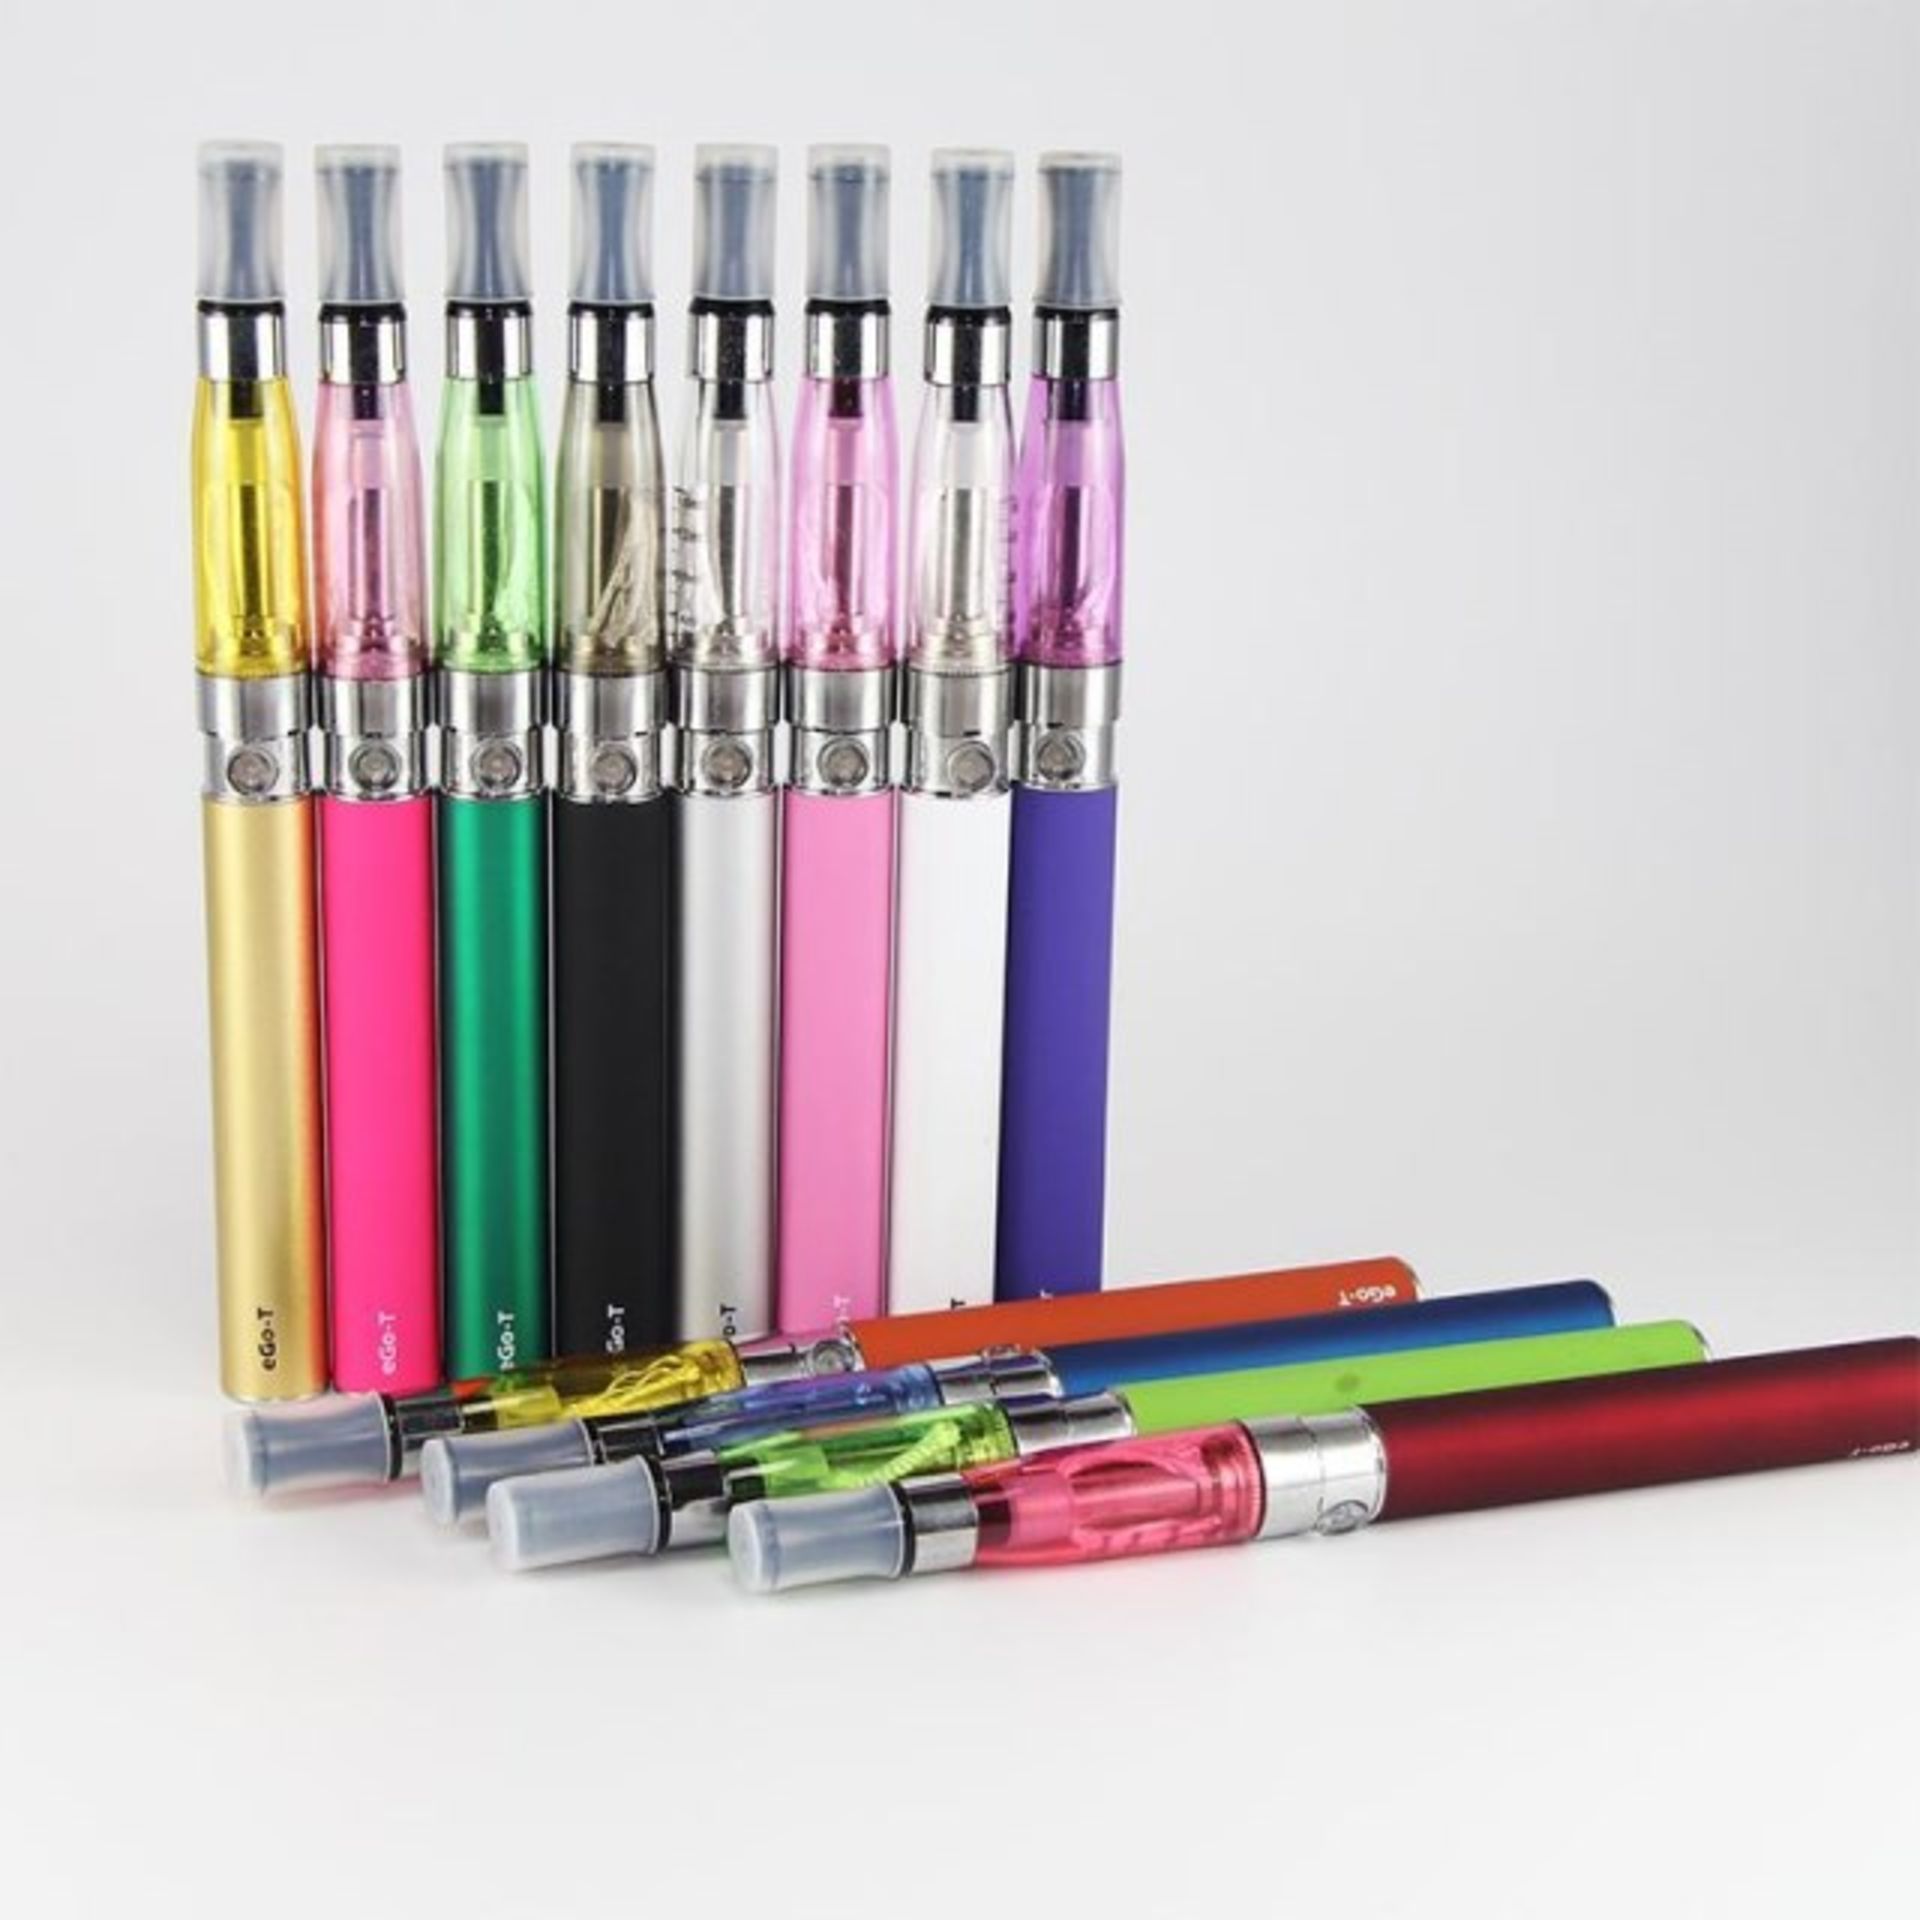 Brand New Electronic Cigarette Kit With Battery And USB Charger (Colours May Vary) X 2 Bid price to